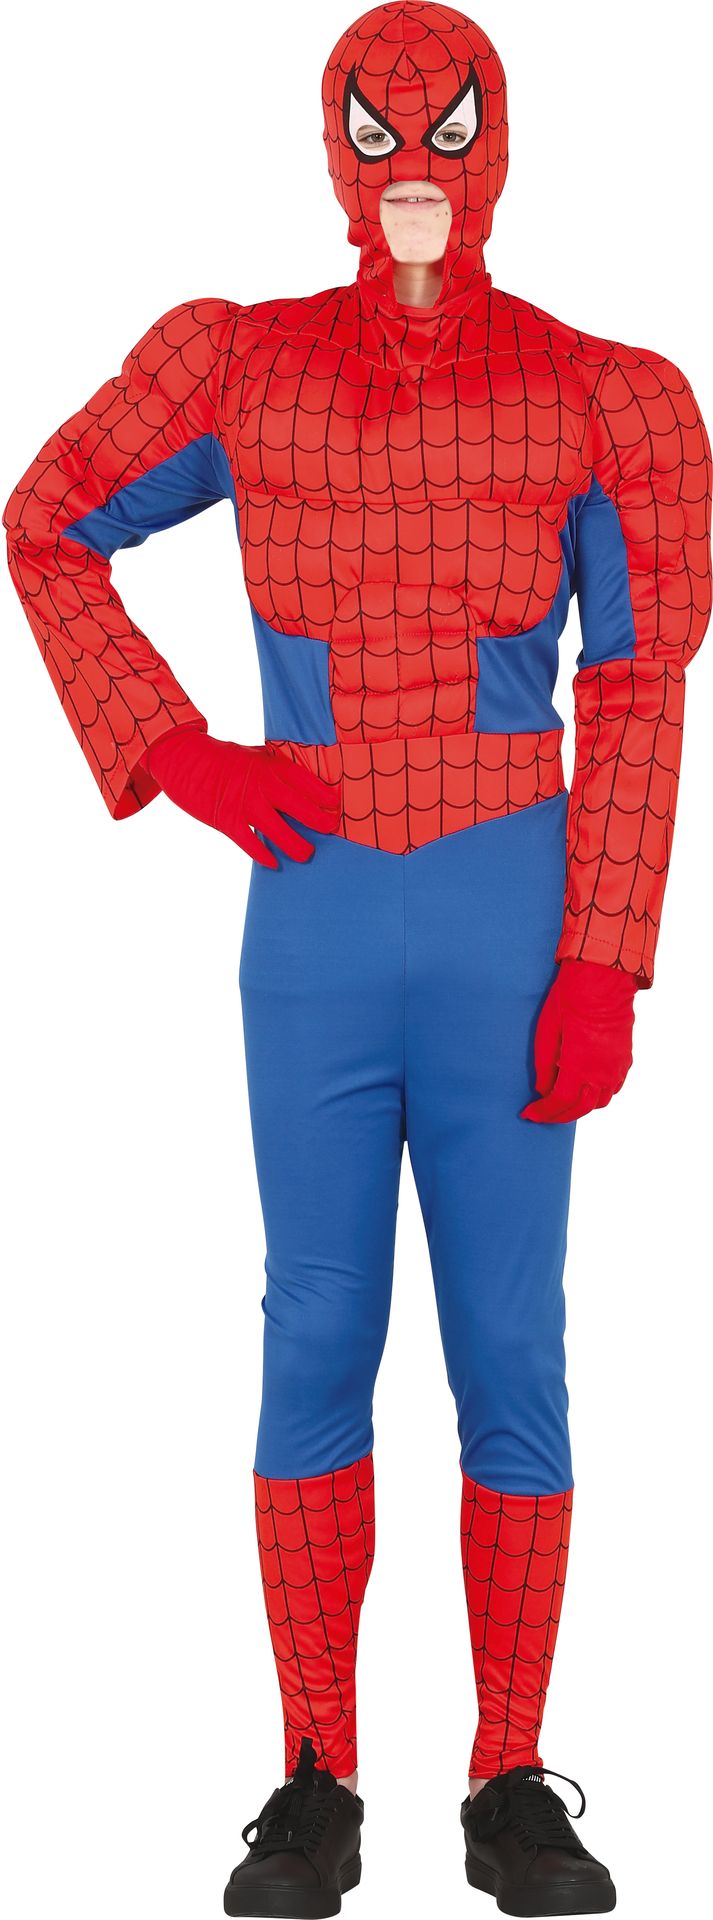 Spiderman outfit kind